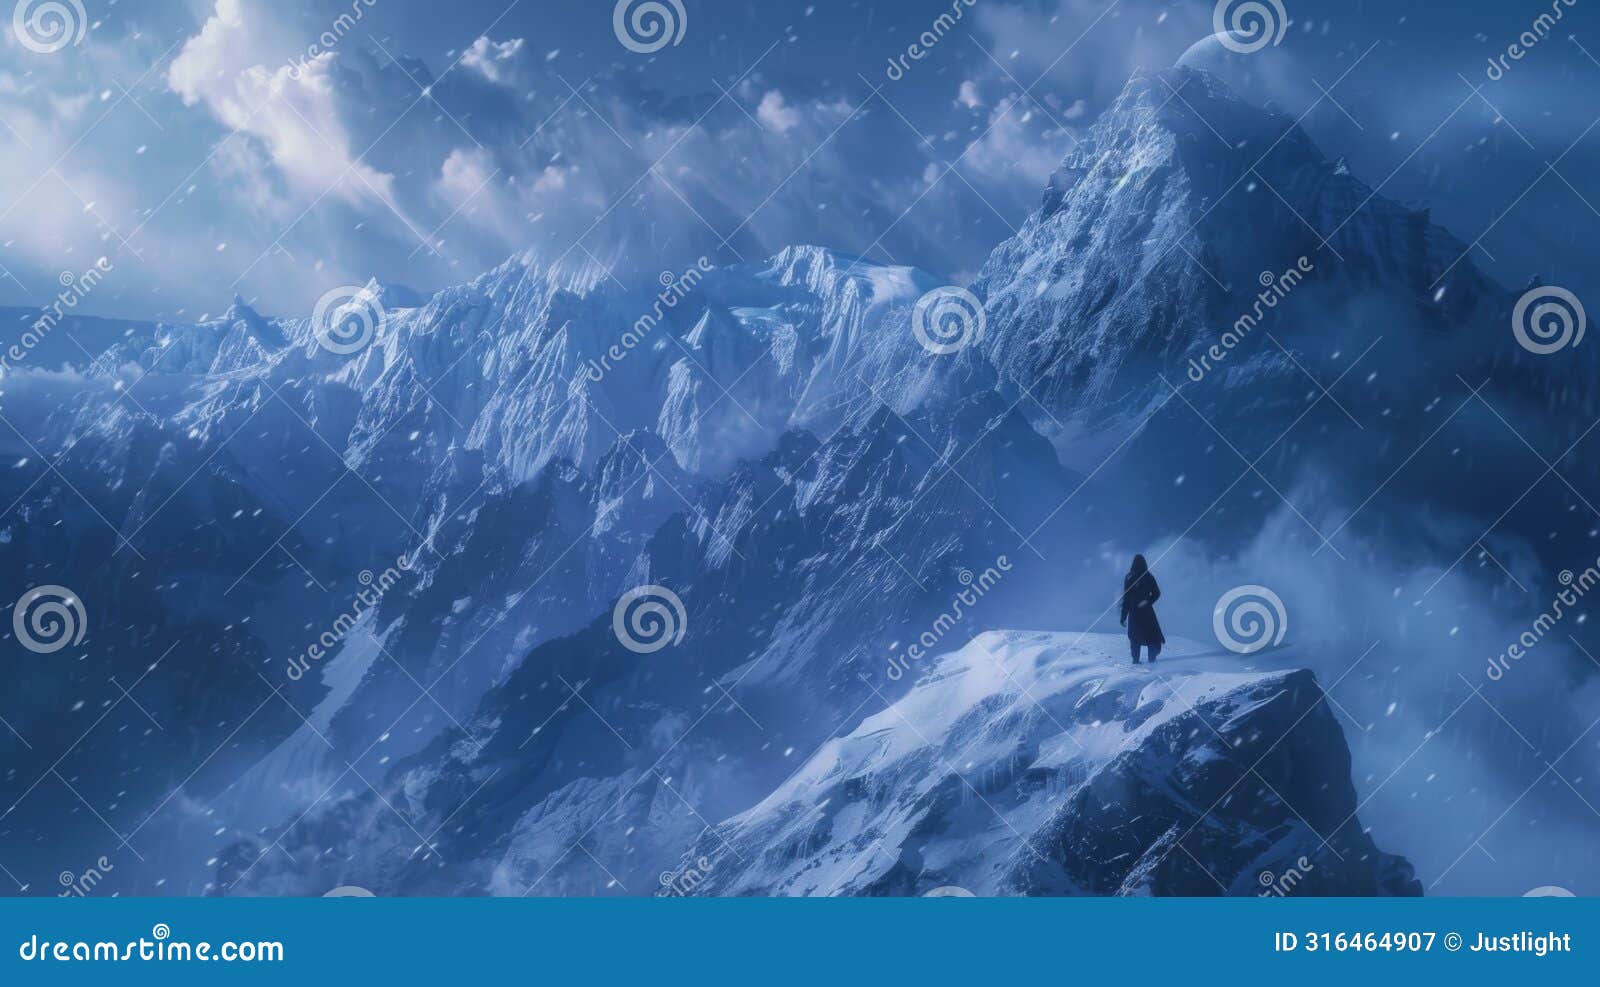 a lone traveler stands atop a snowcovered mountain grappling with the intense gusts of wind and ice that could easily